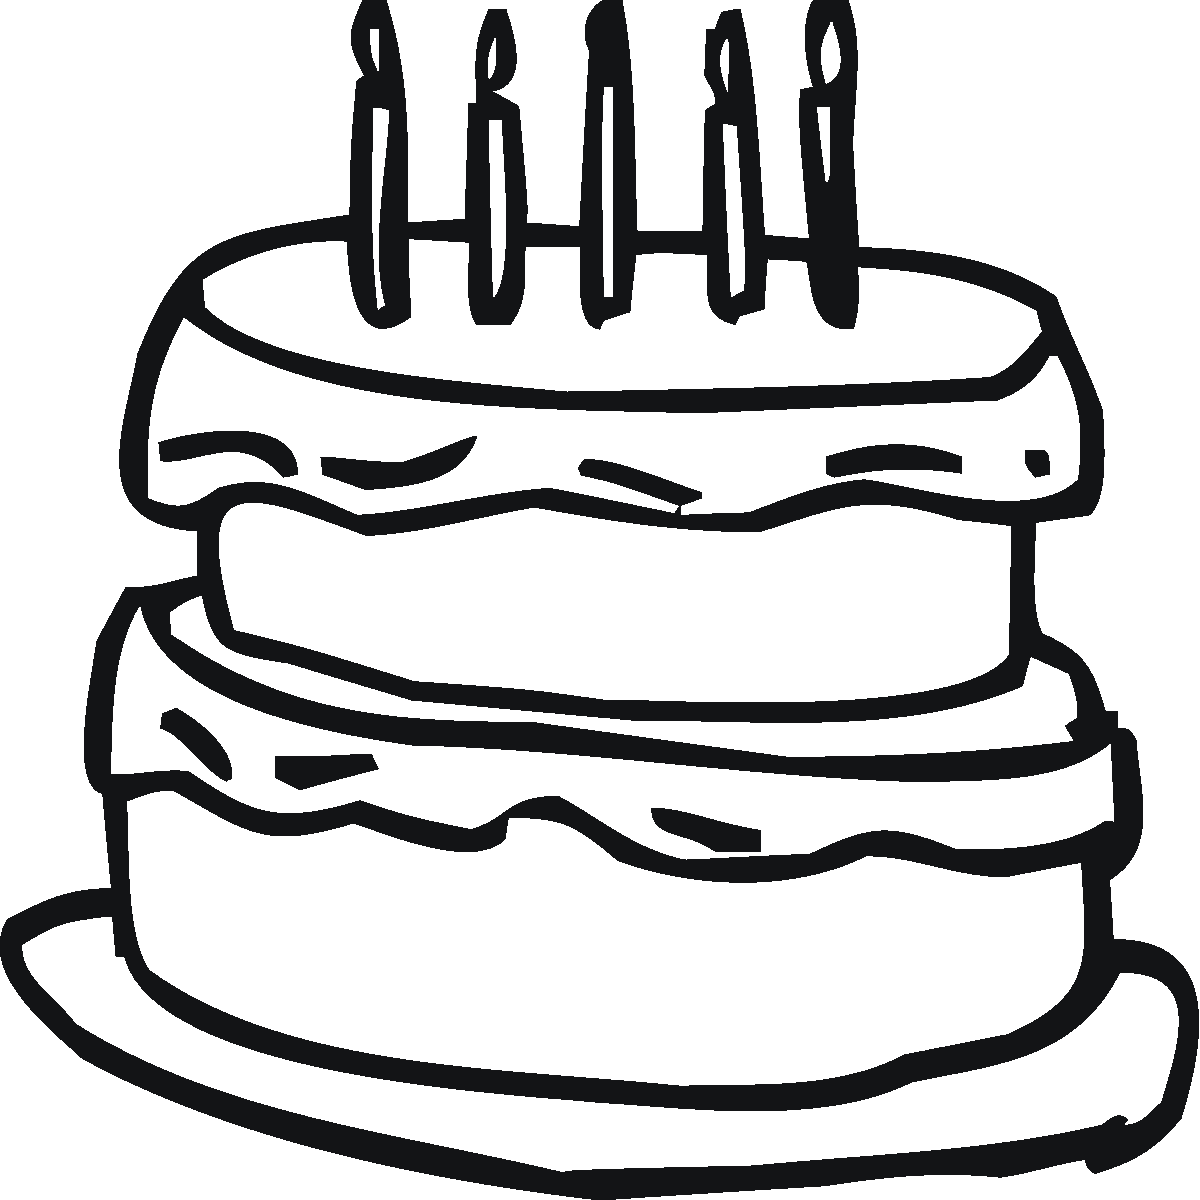 Cake Birthday Cake Coloring Pages - Coloring Pages For All Ages